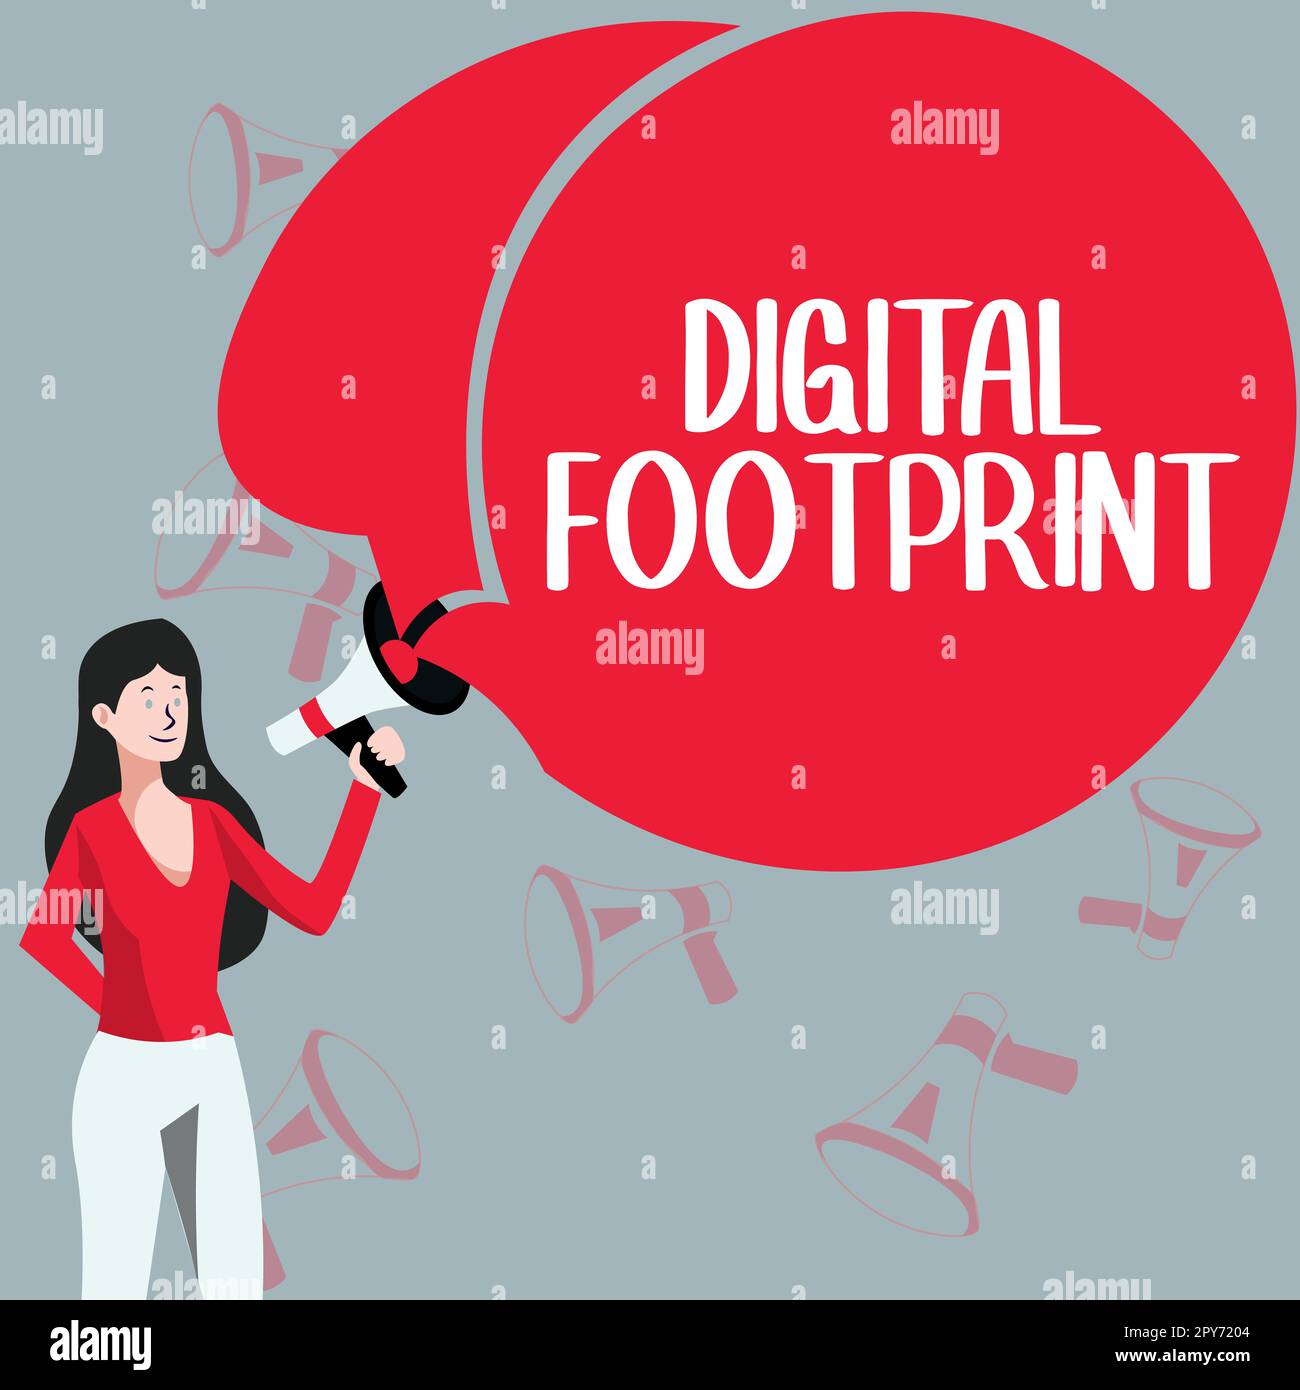 Text showing inspiration Digital Footprint. Word for uses digital technology to operate the manufacturing process Stock Photo